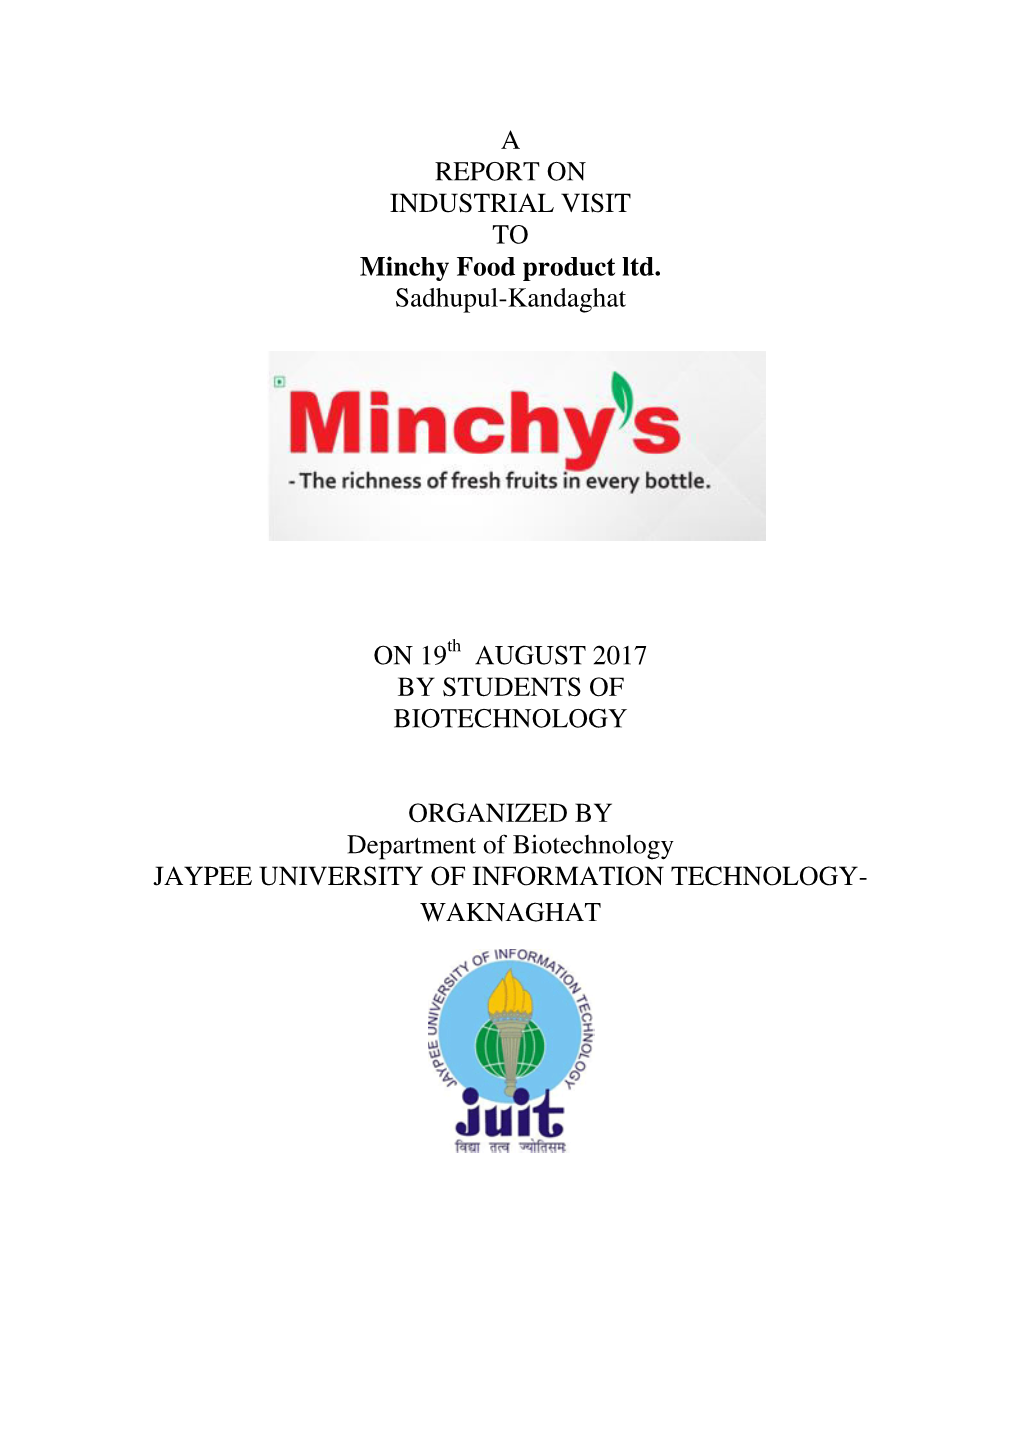 A REPORT on INDUSTRIAL VISIT to Minchy Food Product Ltd. Sadhupul-Kandaghat